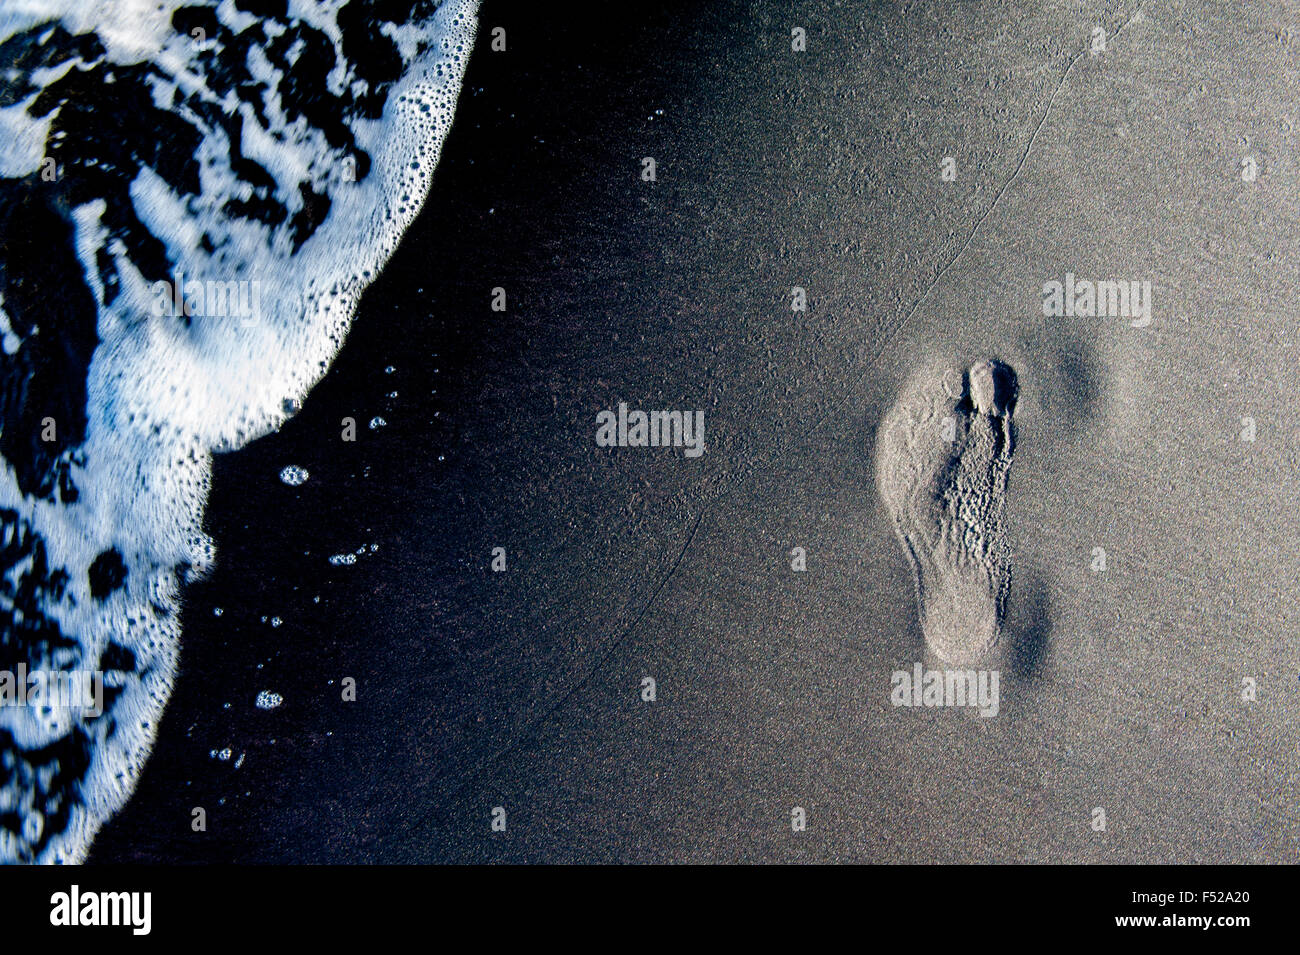 Human footprint placed on beach sand, water waves arriving Stock Photo